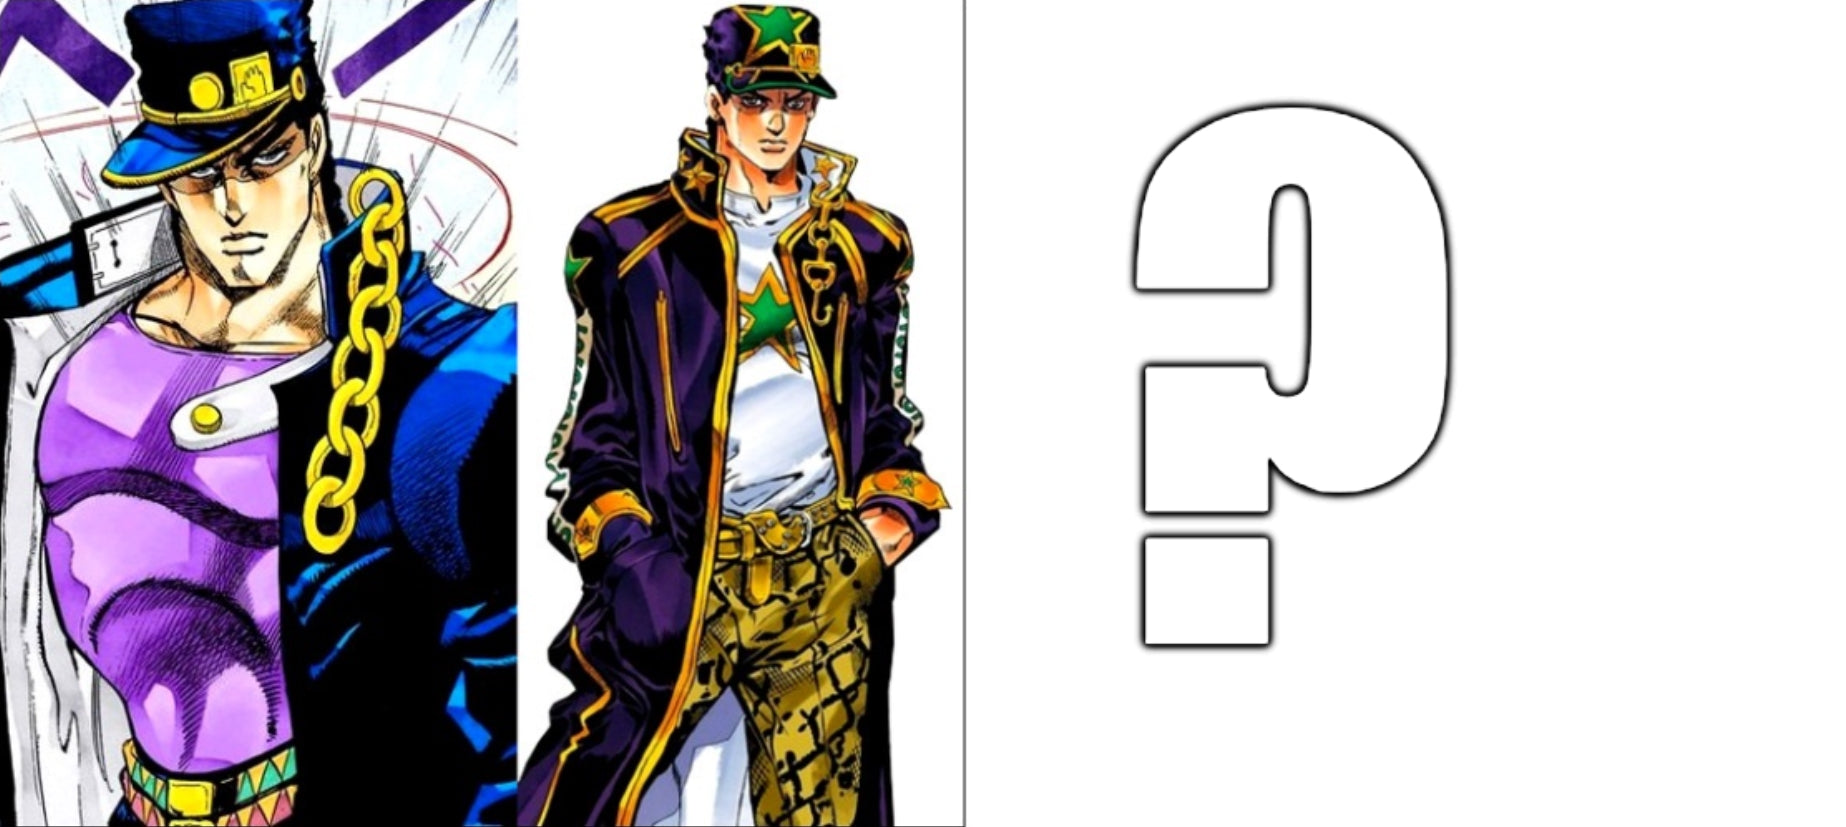 There's a Rebooted Jotaro Kujo